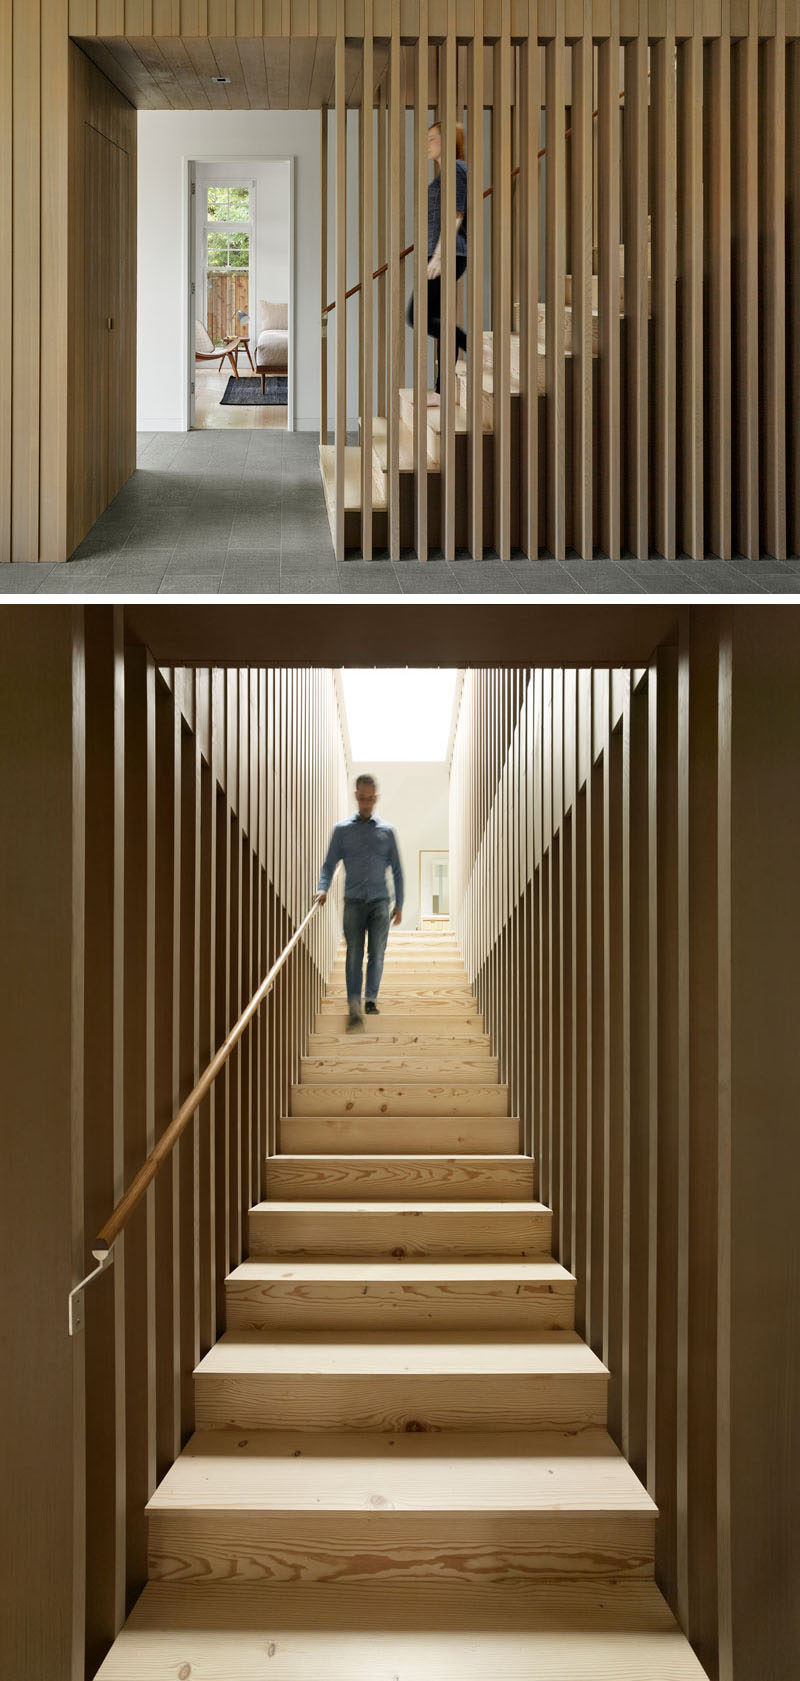 These modern stairs are surrounded by wood slats that don't block the light. There's also a skylight to keep the stairwell bright.